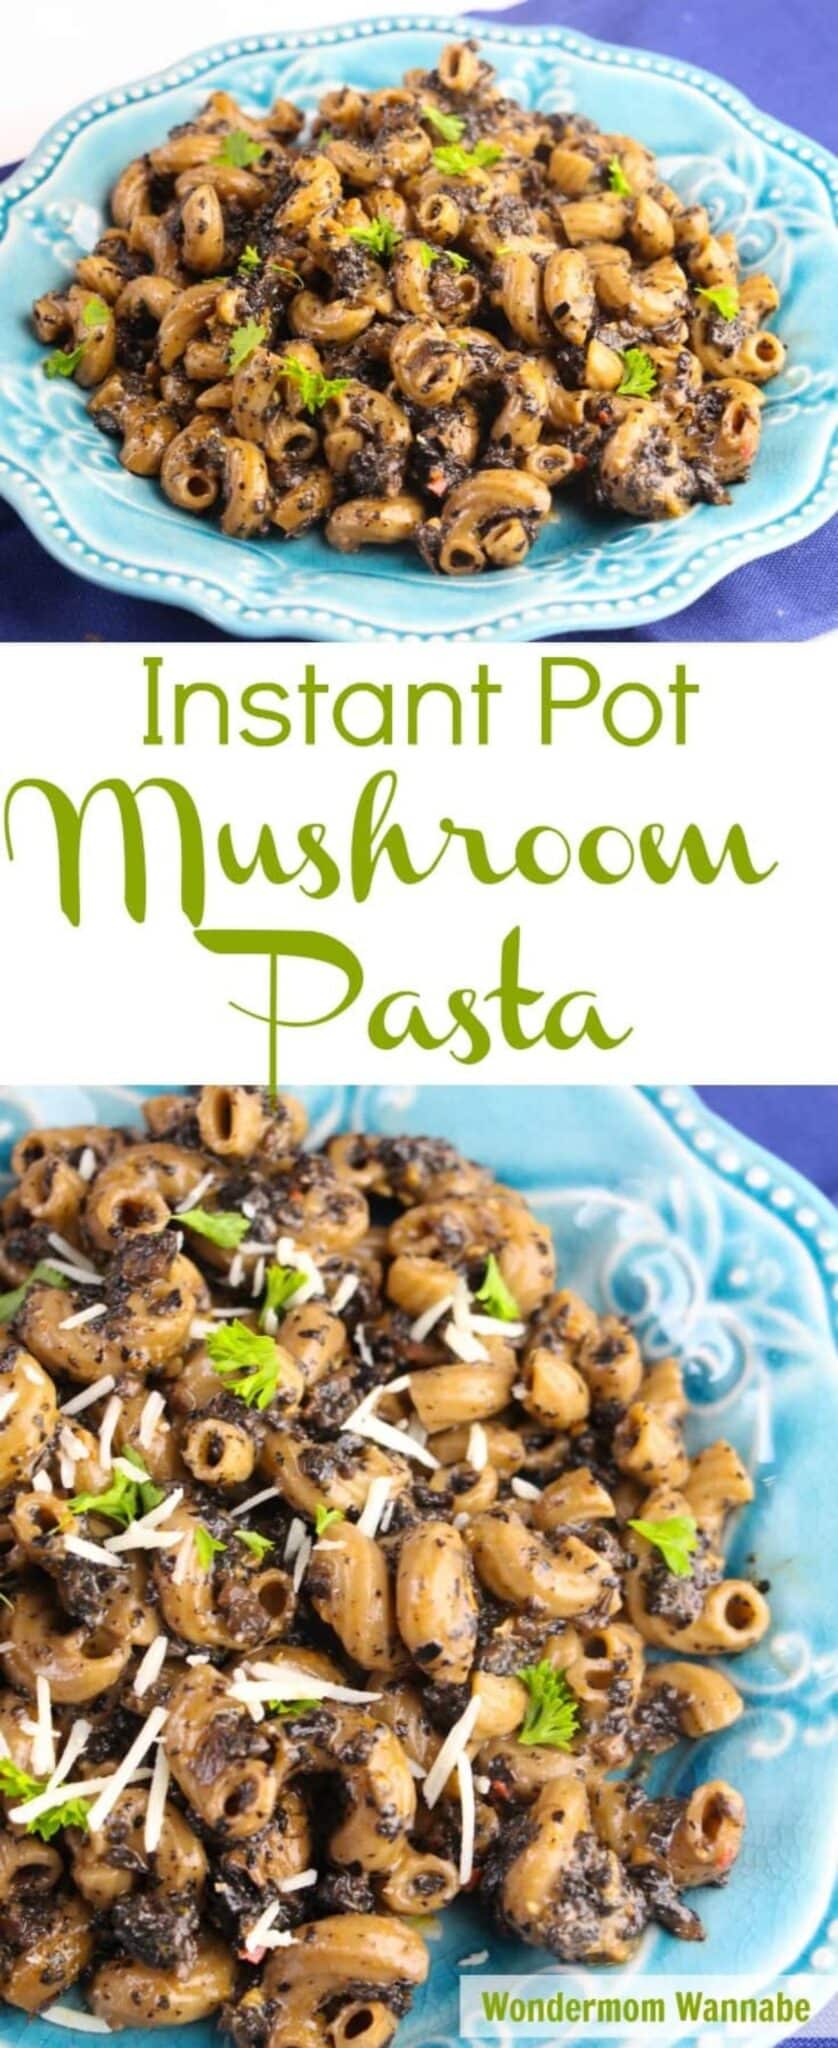 Instant pot mushroom pasta served on a vibrant blue plate with text title Instant Pot Mushroom Pasta.